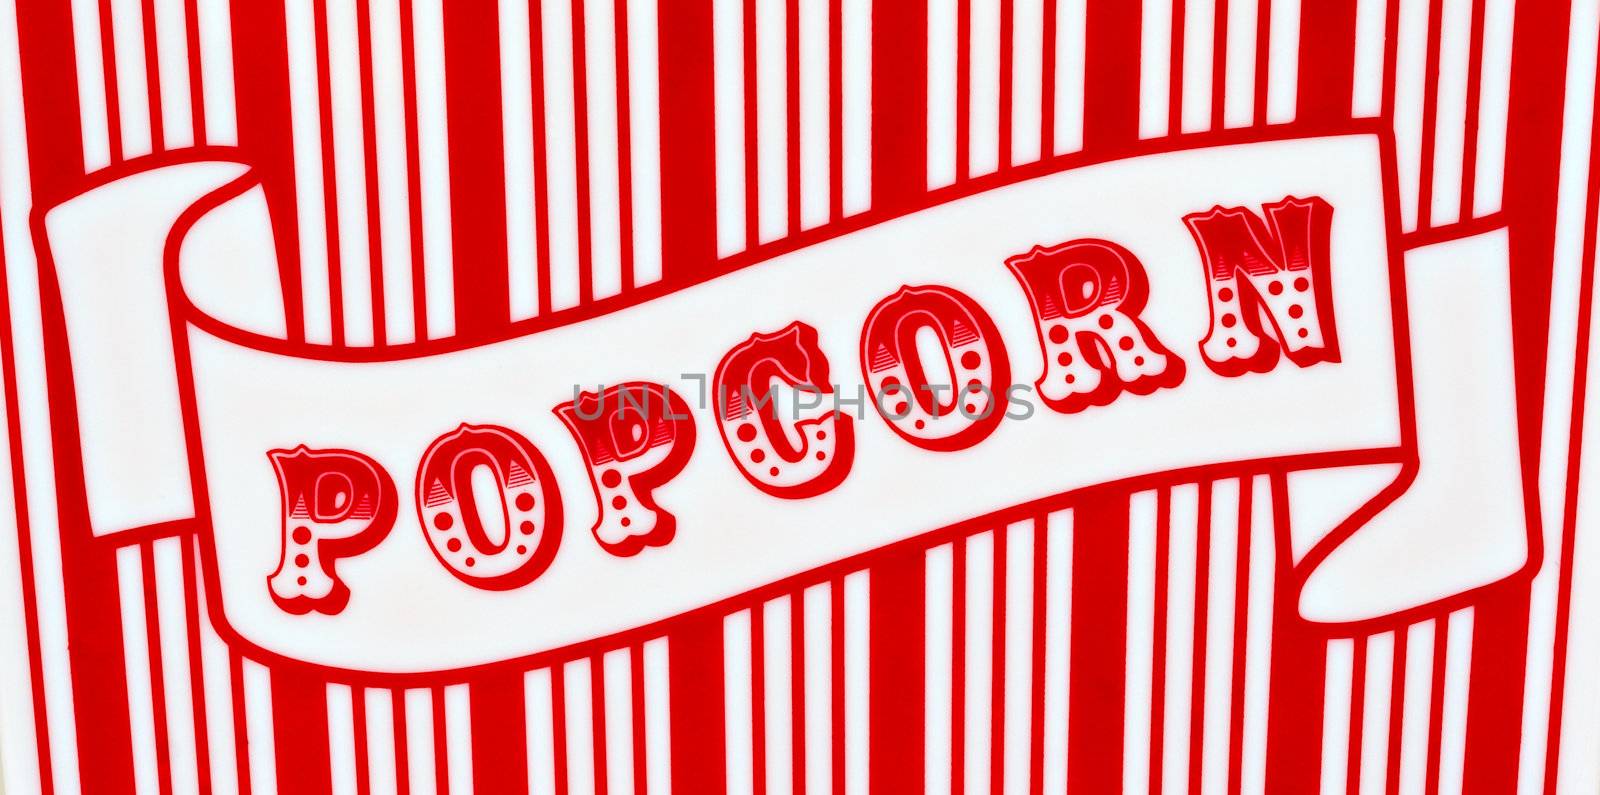 Red and white popcorn sign on red and white striped background